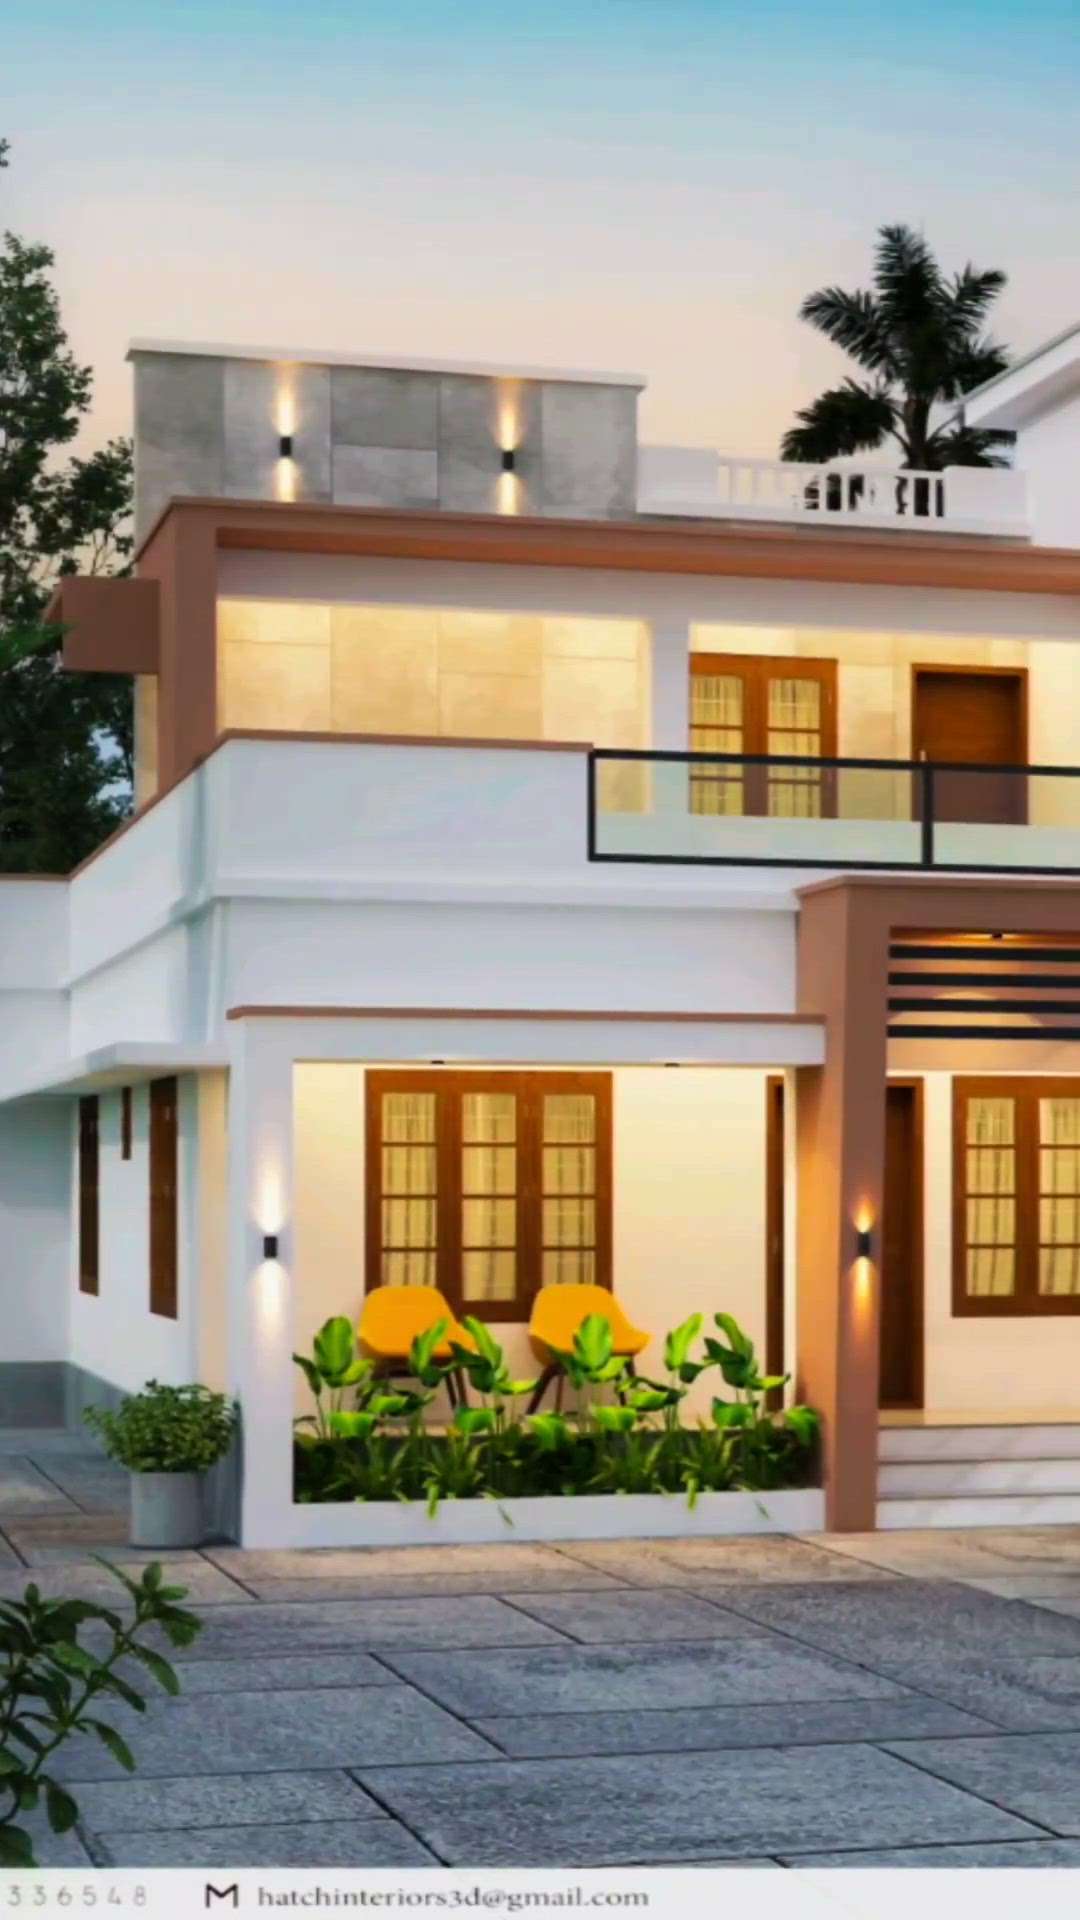 3D Elevation Start From 2000
🔸OUR SERVICES
▪️ DESIGN CONSULTATION 
▪️3D ELEVATION DESIGNING
▪️3D INTERIOR DESIGNING
▪️3D AERIAL VIEW
▪️3D FLOOR PLAN
▪️3D LANDSCAPING
▪️INTERIOR CAD DRAWING
.
.
.
.
.
.

👤Client - Karuna Builder's 
📍 Kollam
.
.
.
.
.



 #3d  #3delevations  #3DPlans  #3ddesigning  #frontElevation  #ElevationDesign  #3D_ELEVATION  #elevationideas  #ElevationHome  #elevation3d  #elevationarmy  #3BHKHouse  #1200sqft_3bhk